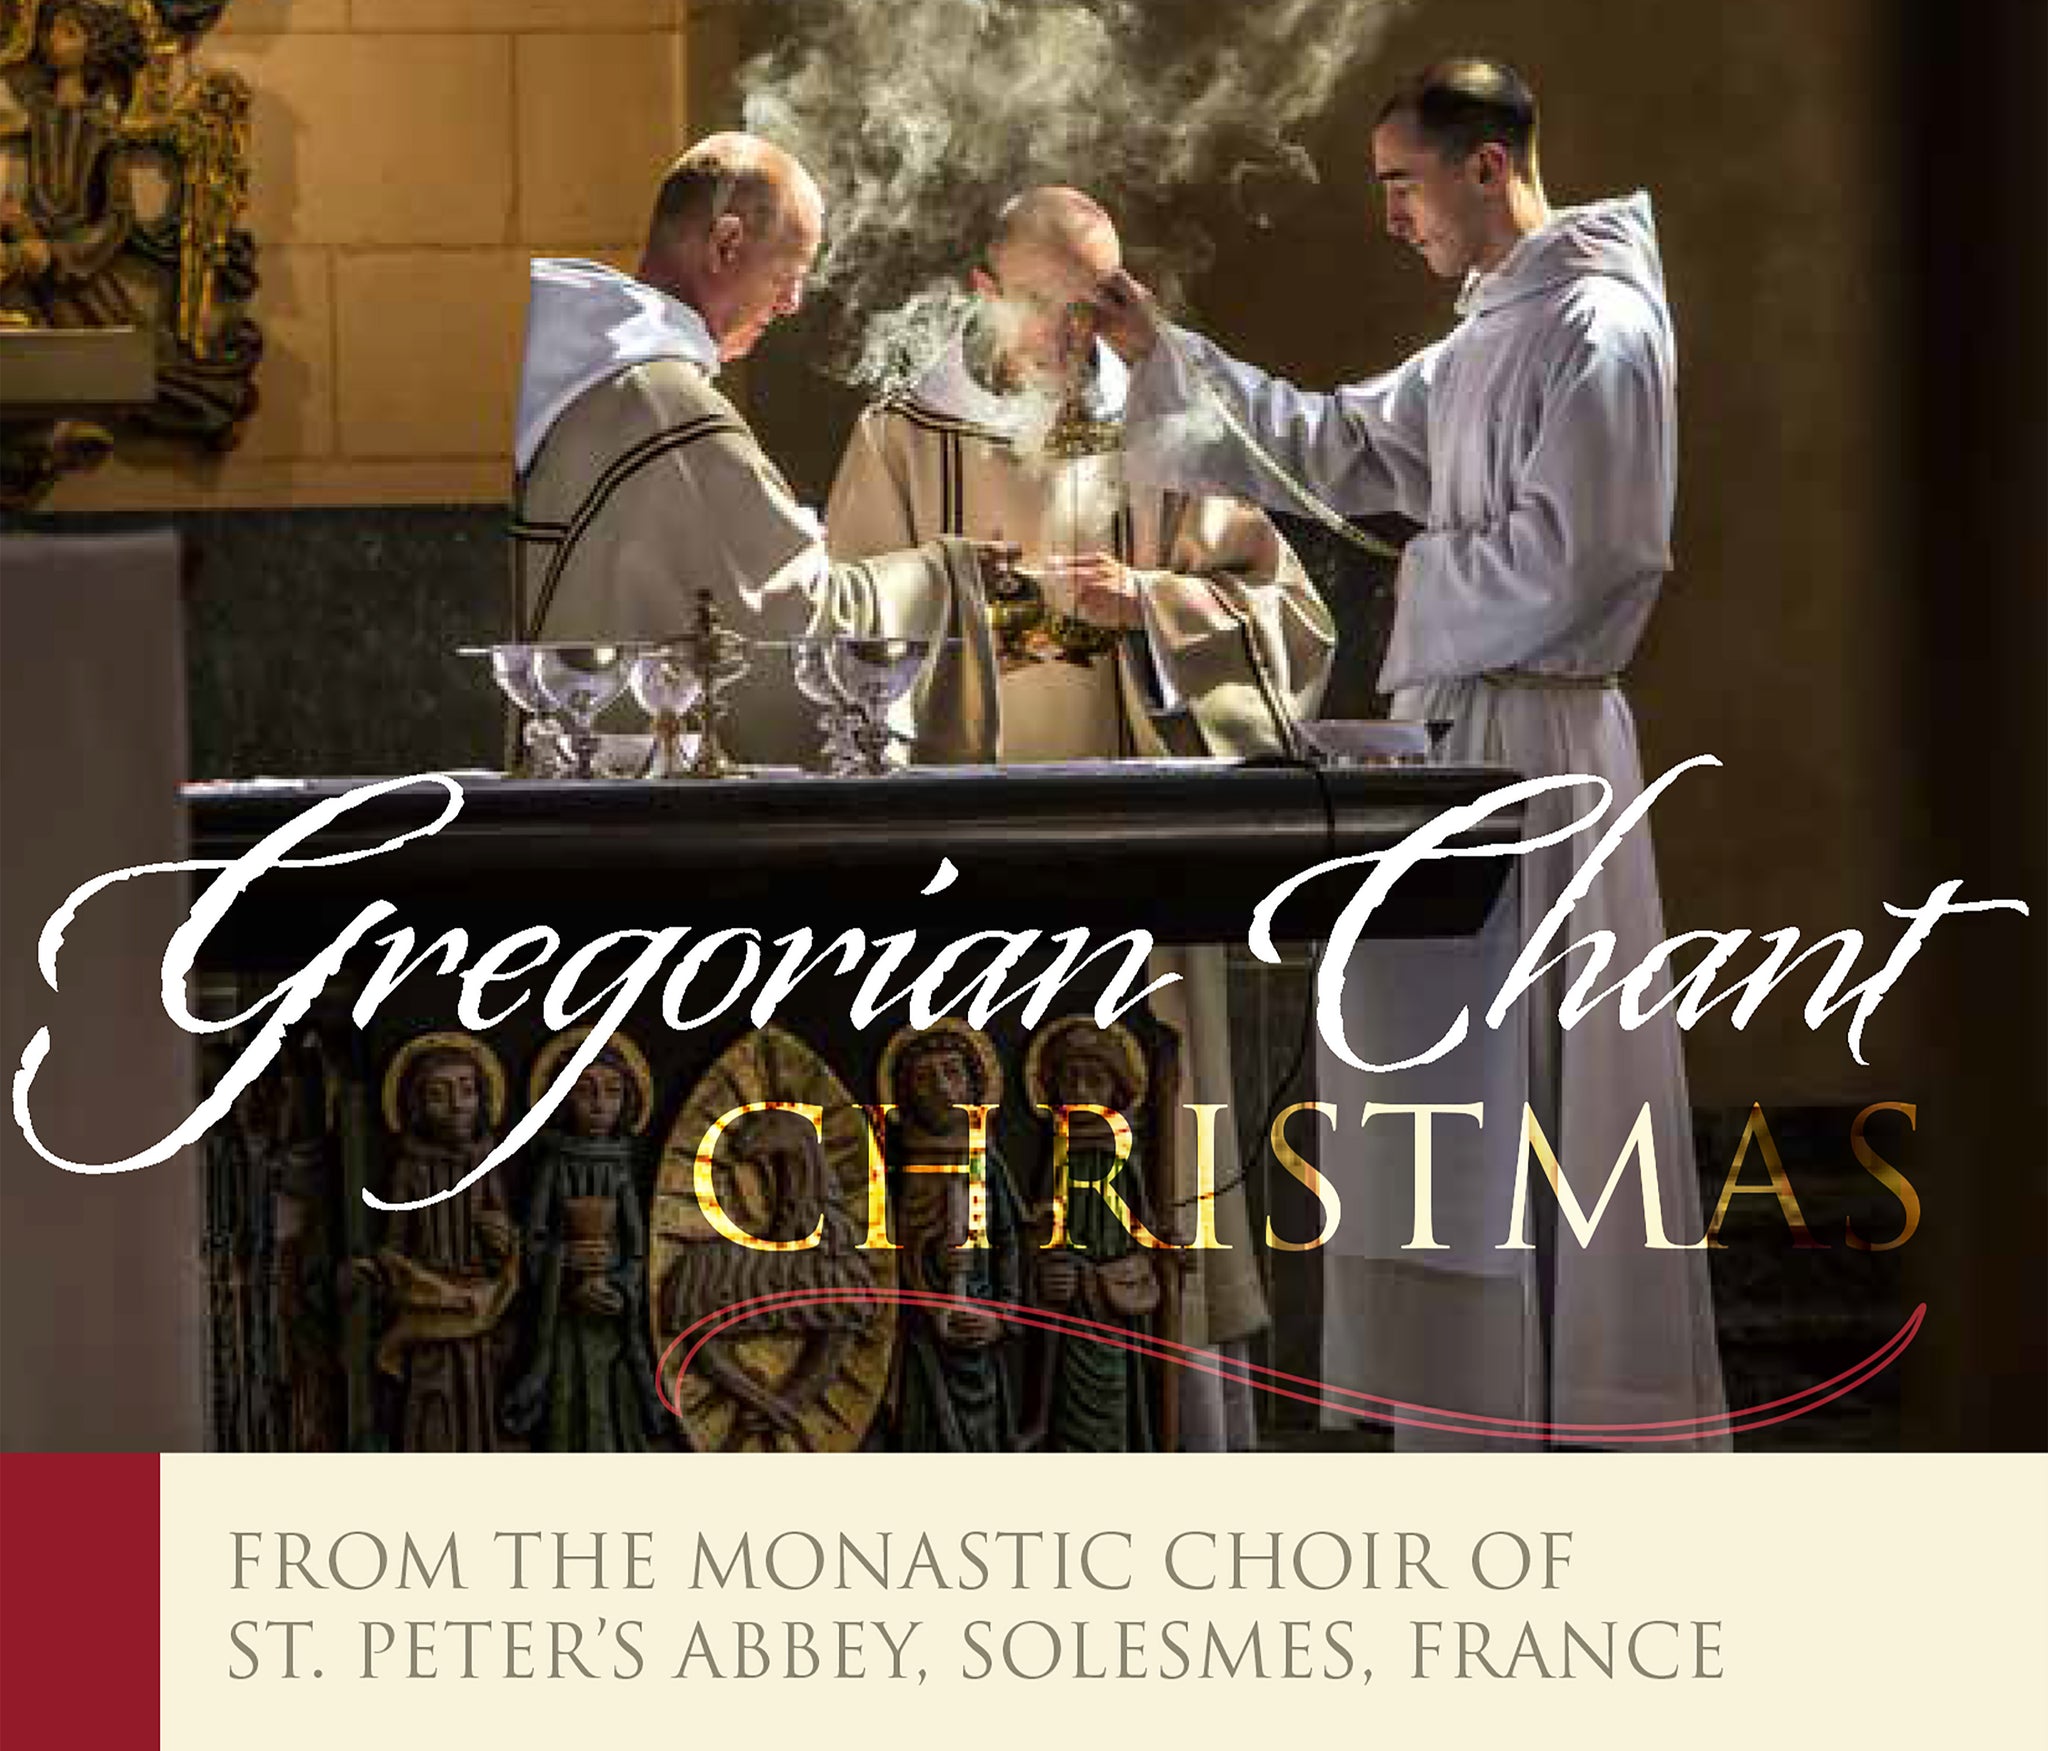 Gregorian Chant Christmas / Monks of Solesmes